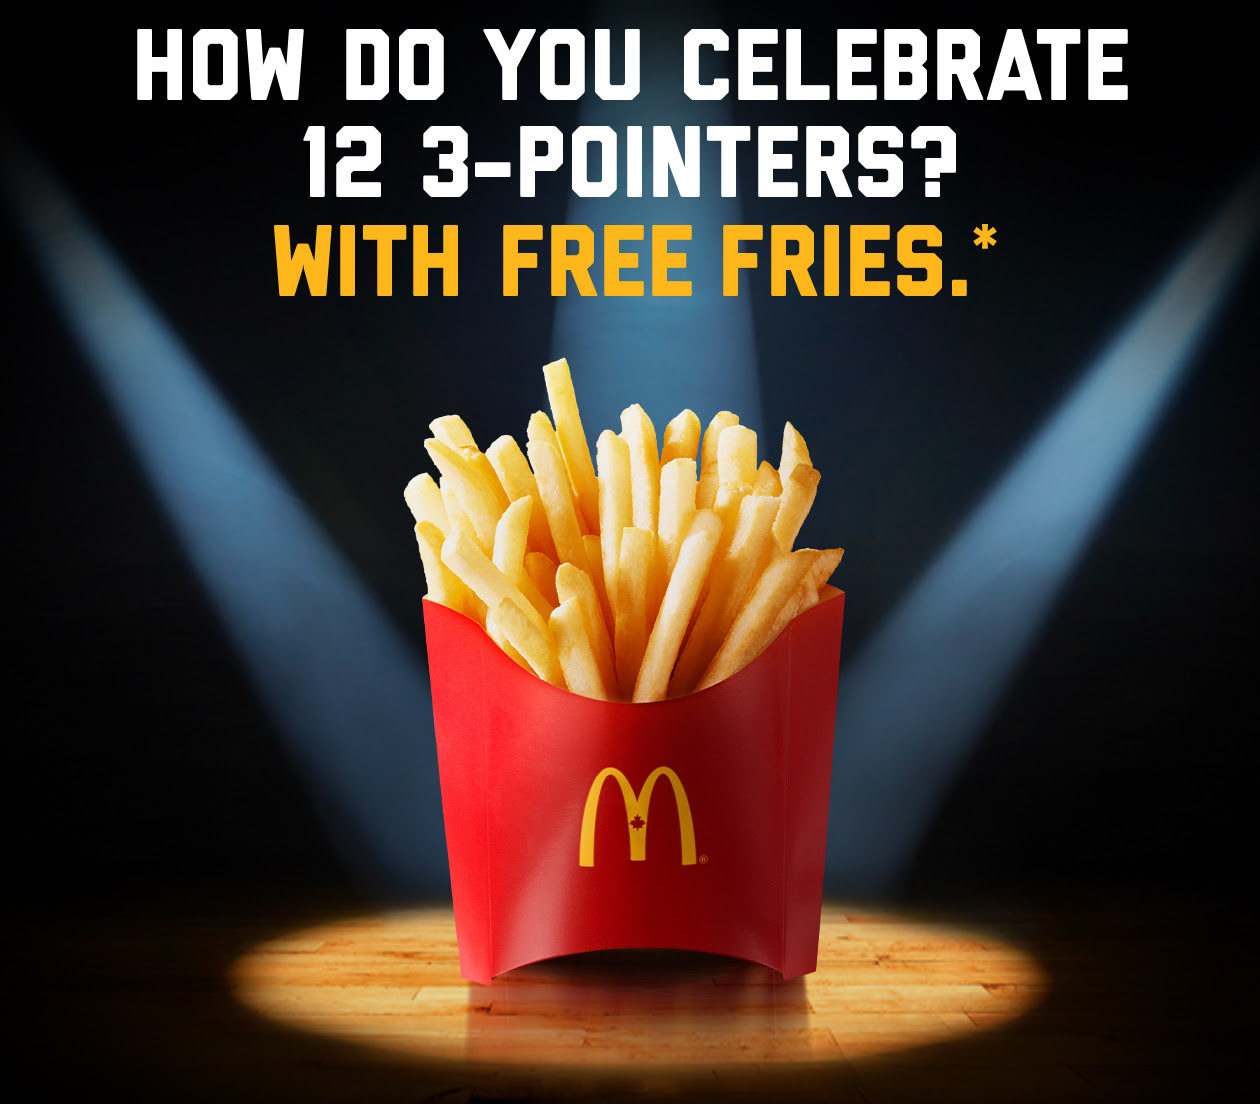 McDonalds] Free medium fries (with $1 purchase) when the Raptors score  twelve or more 3-pointers (Ontario and Atlantic Canada) - RedFlagDeals.com  Forums